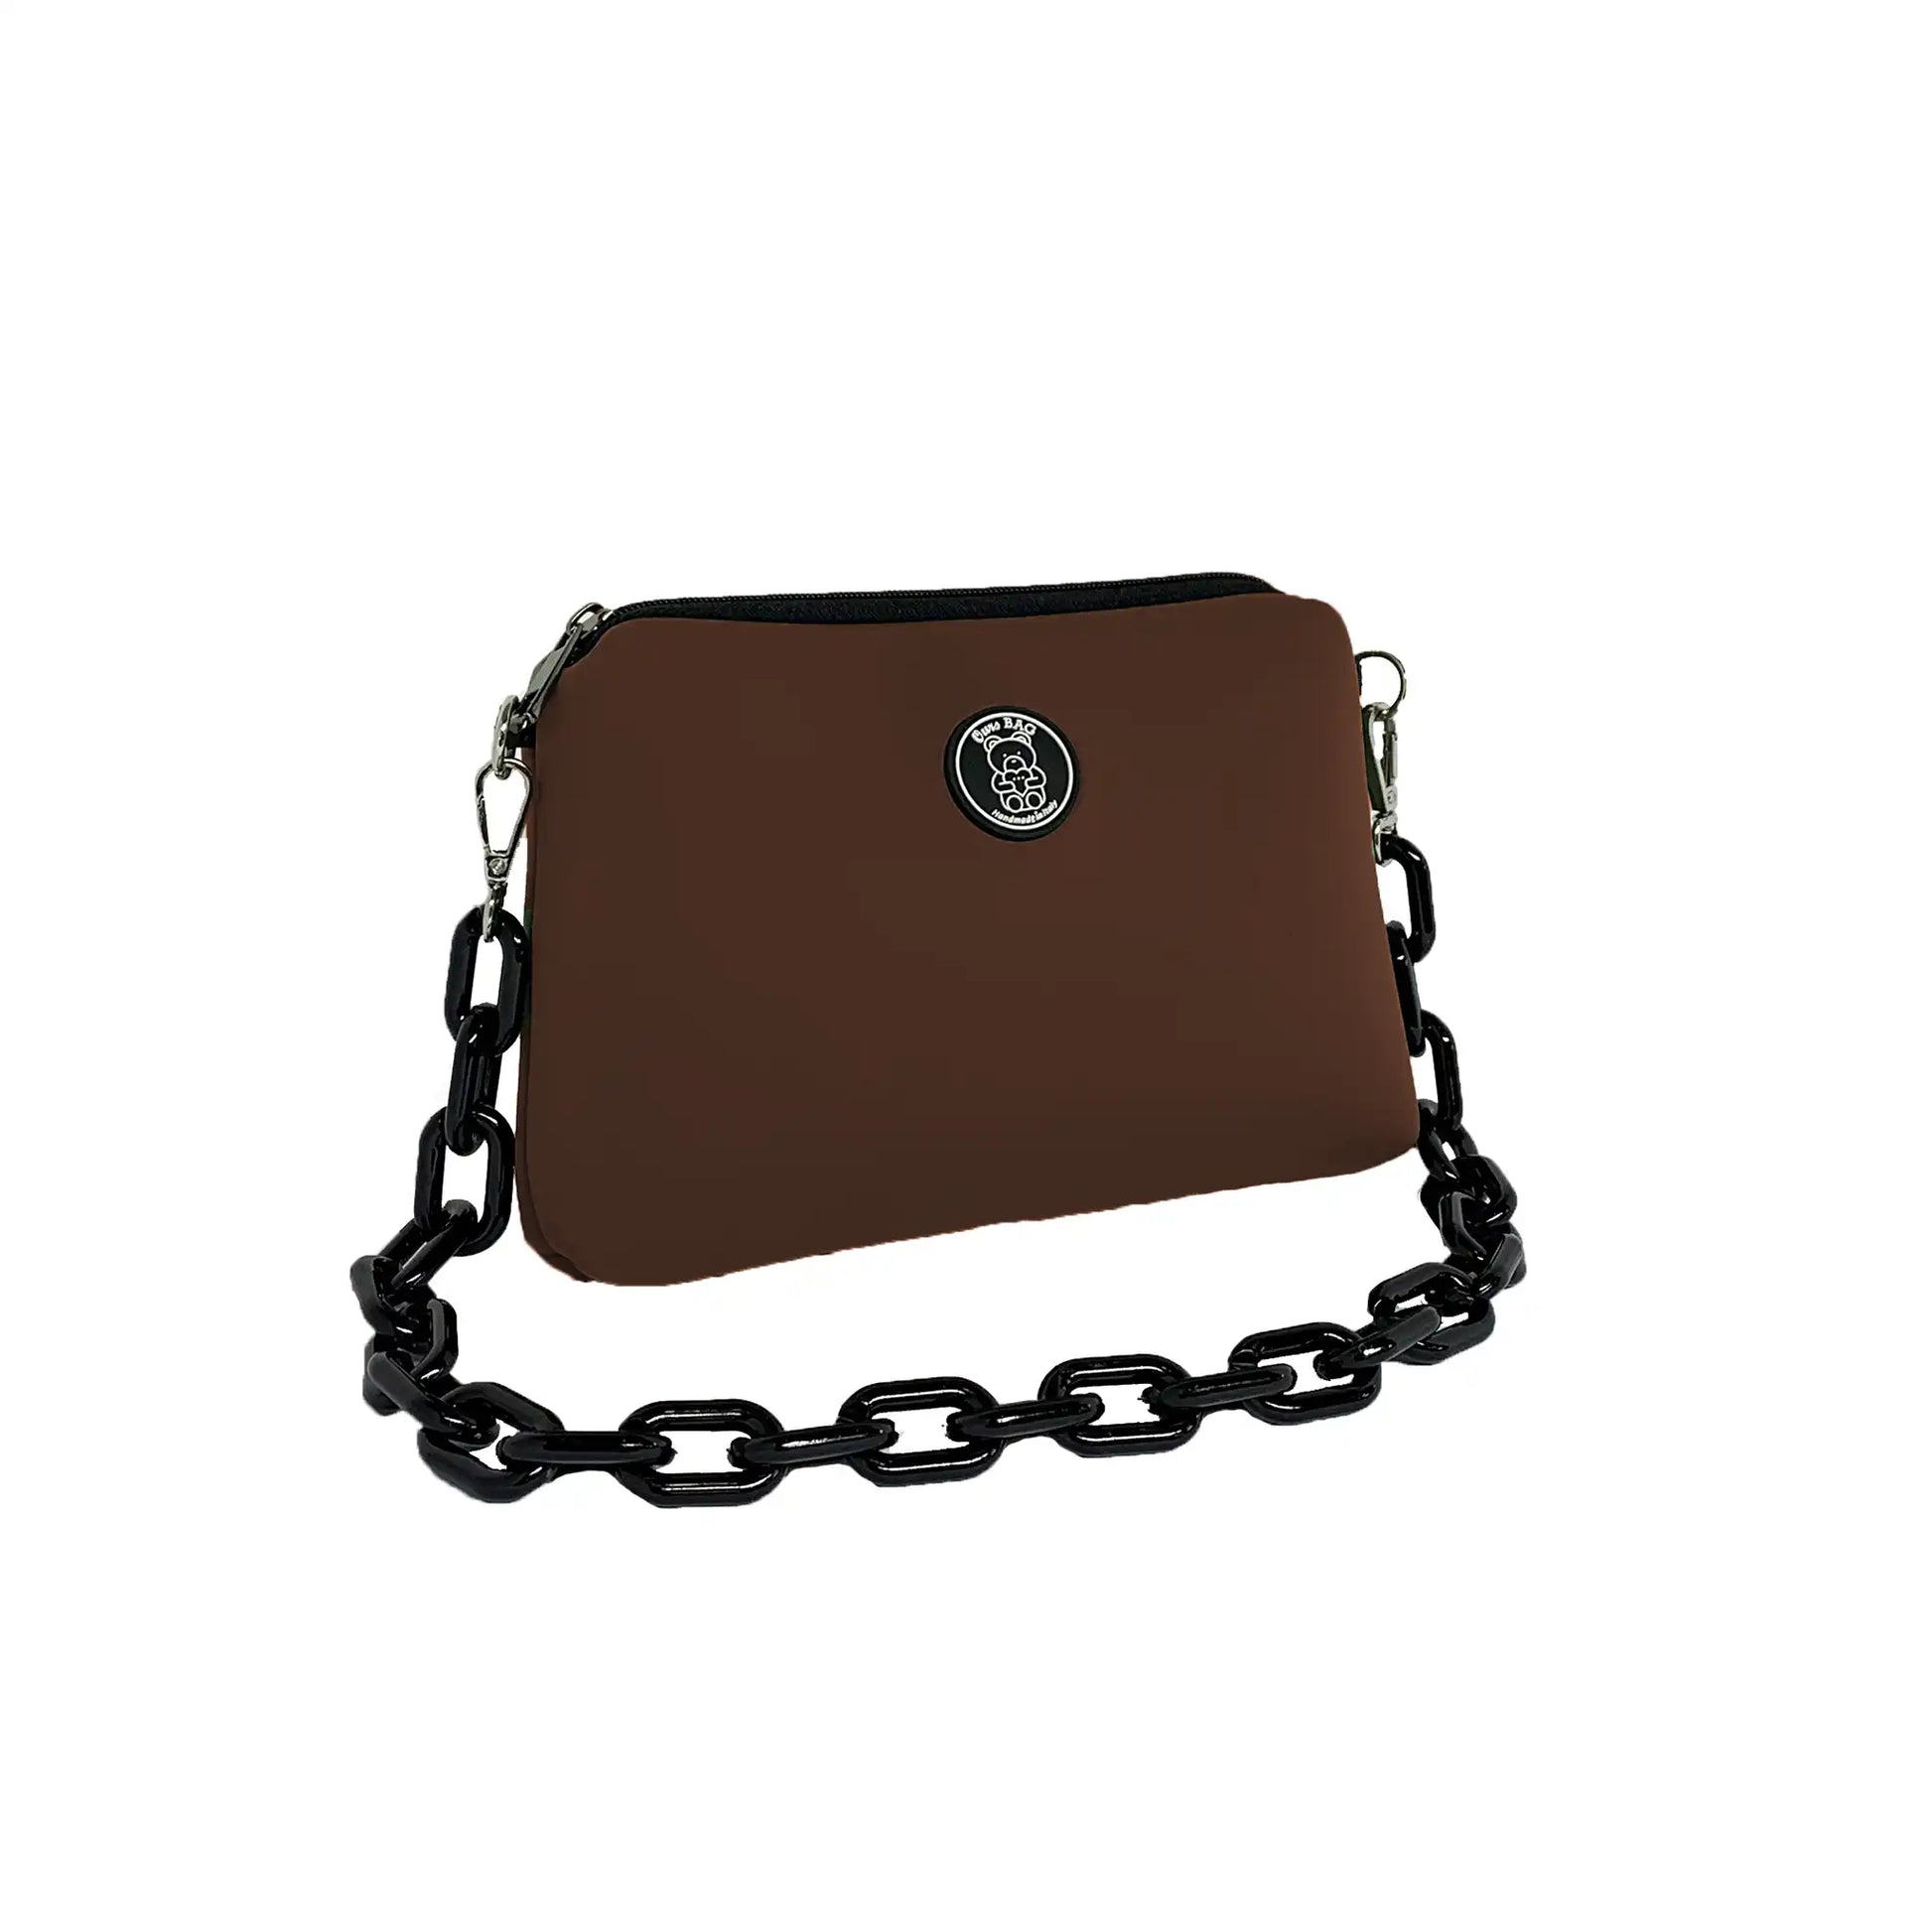 Pochette con Catena (Brown) by Ours Bag